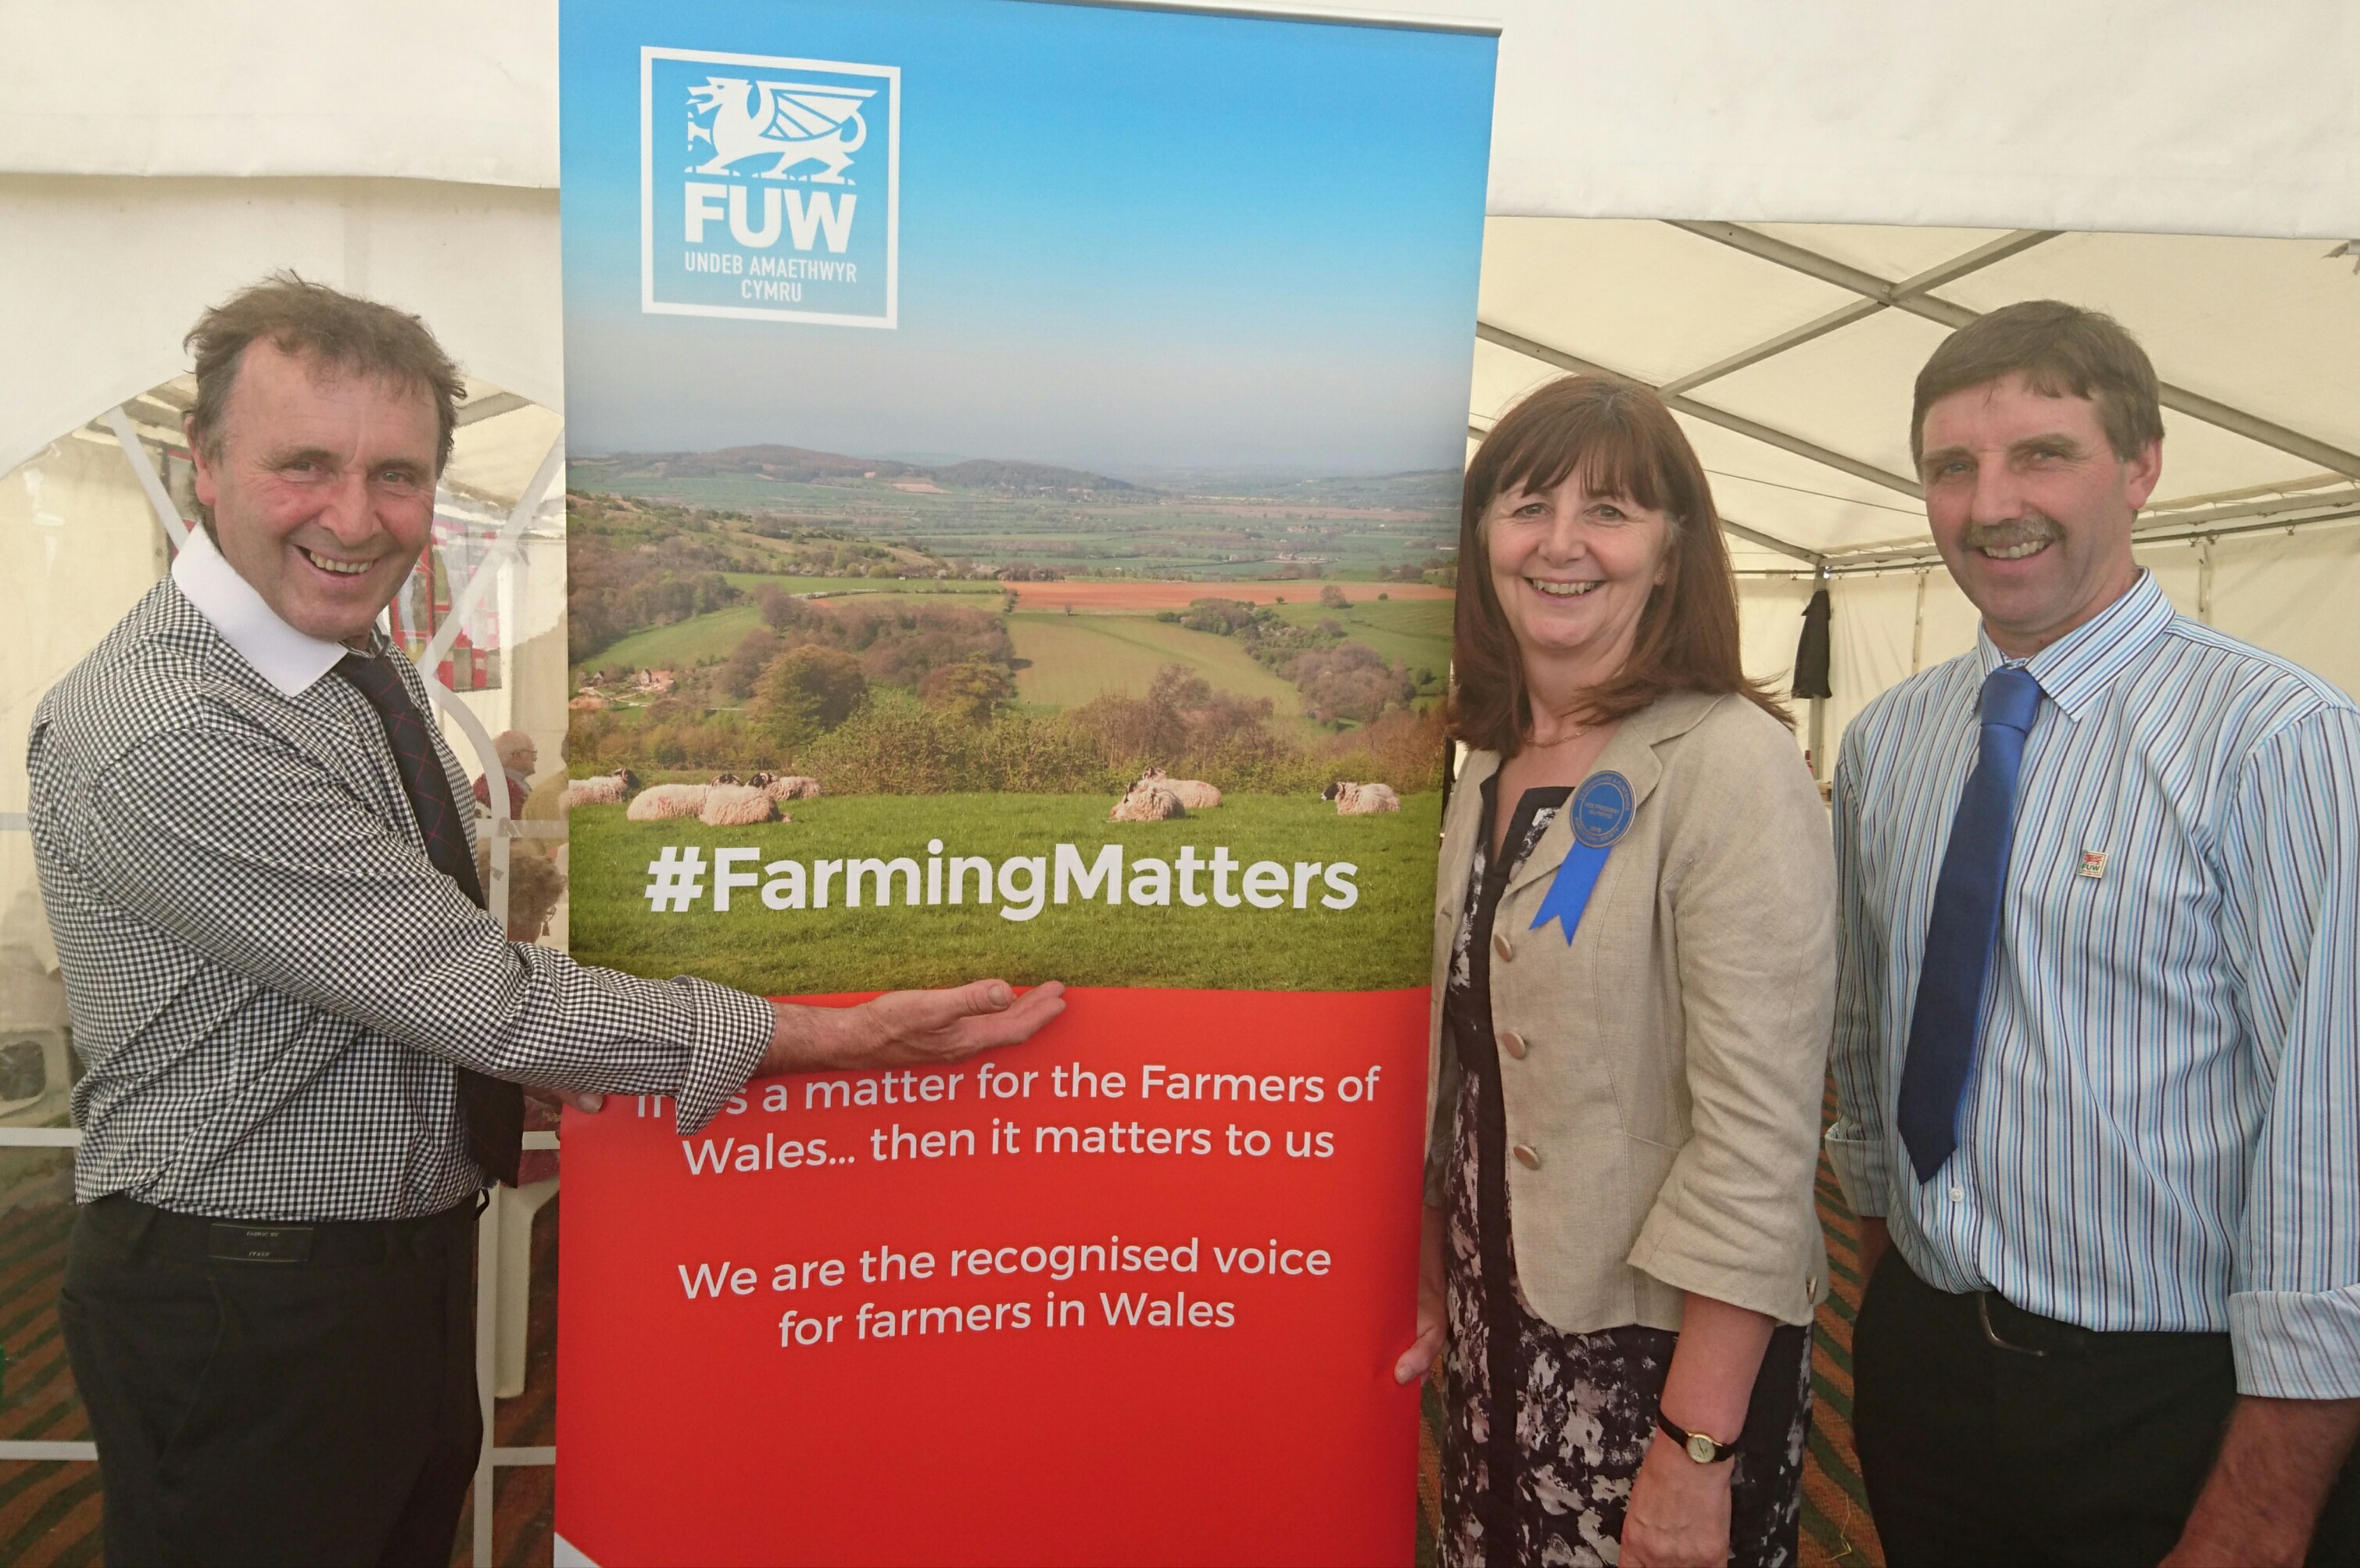 Welsh Union officials meet with Rural Secretary to discuss #FarmingMatters